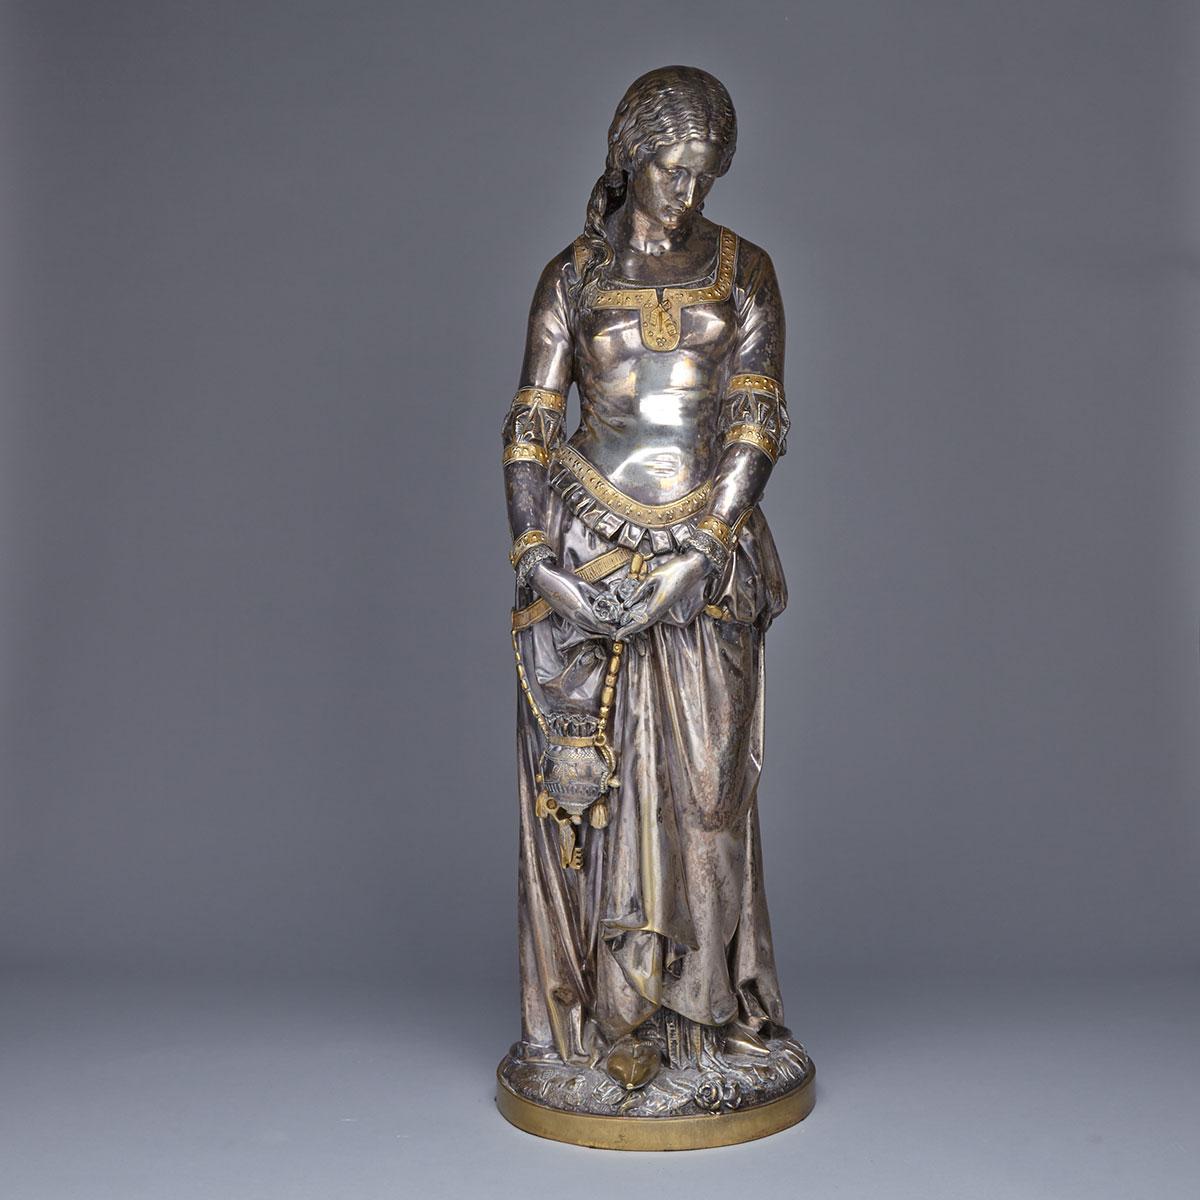 French Silvered and Parcel Gilt Bronze Figure of a Renaissance Maiden, 19th century